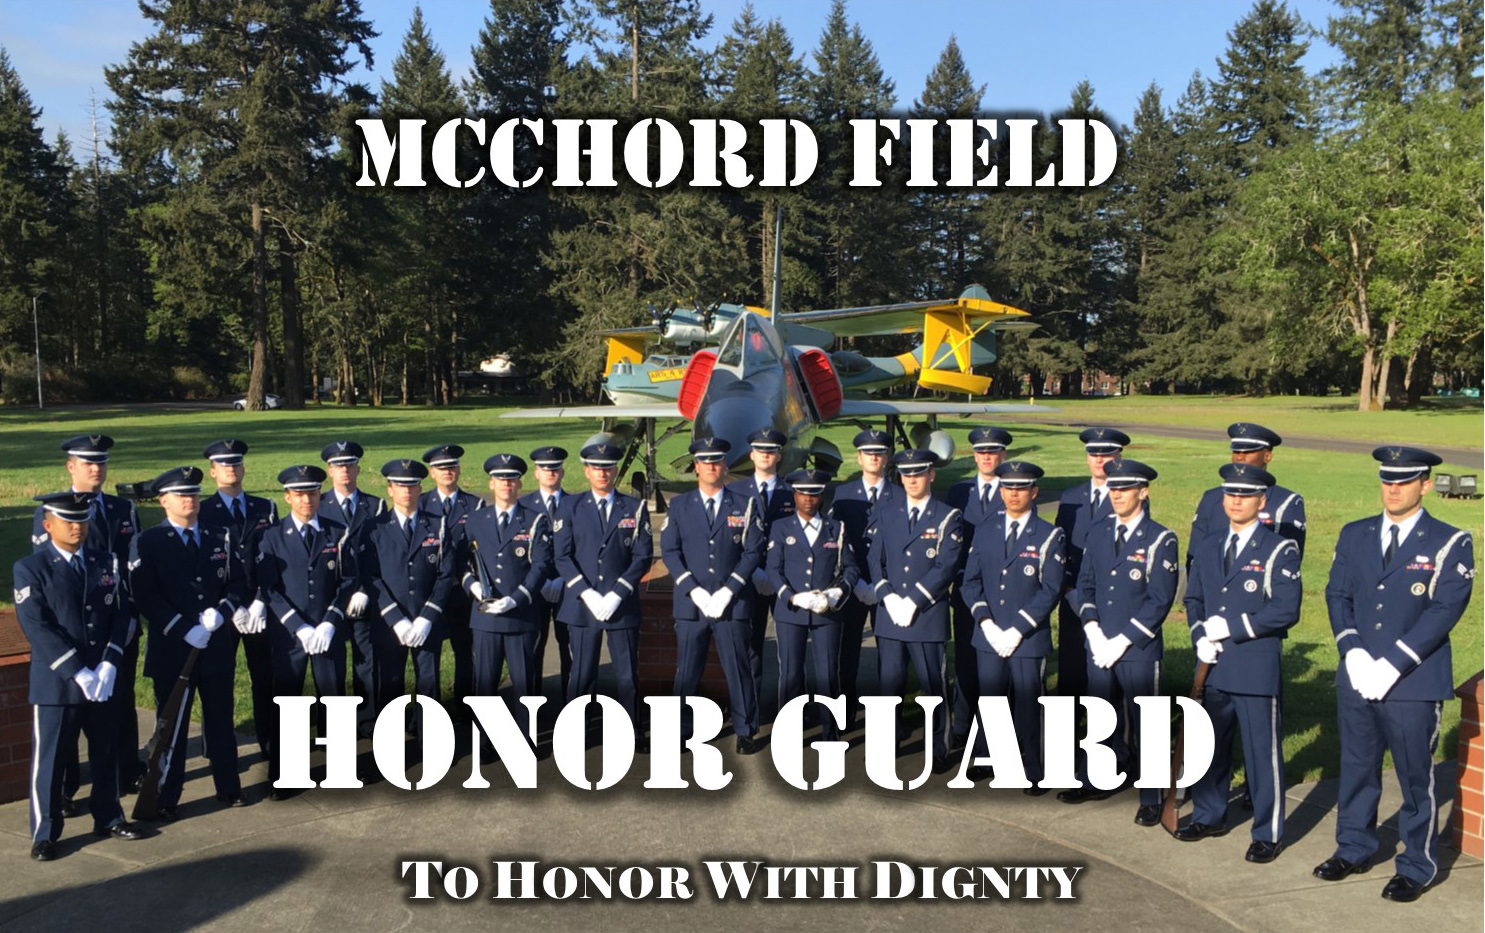 McChord Field honor guard group photo